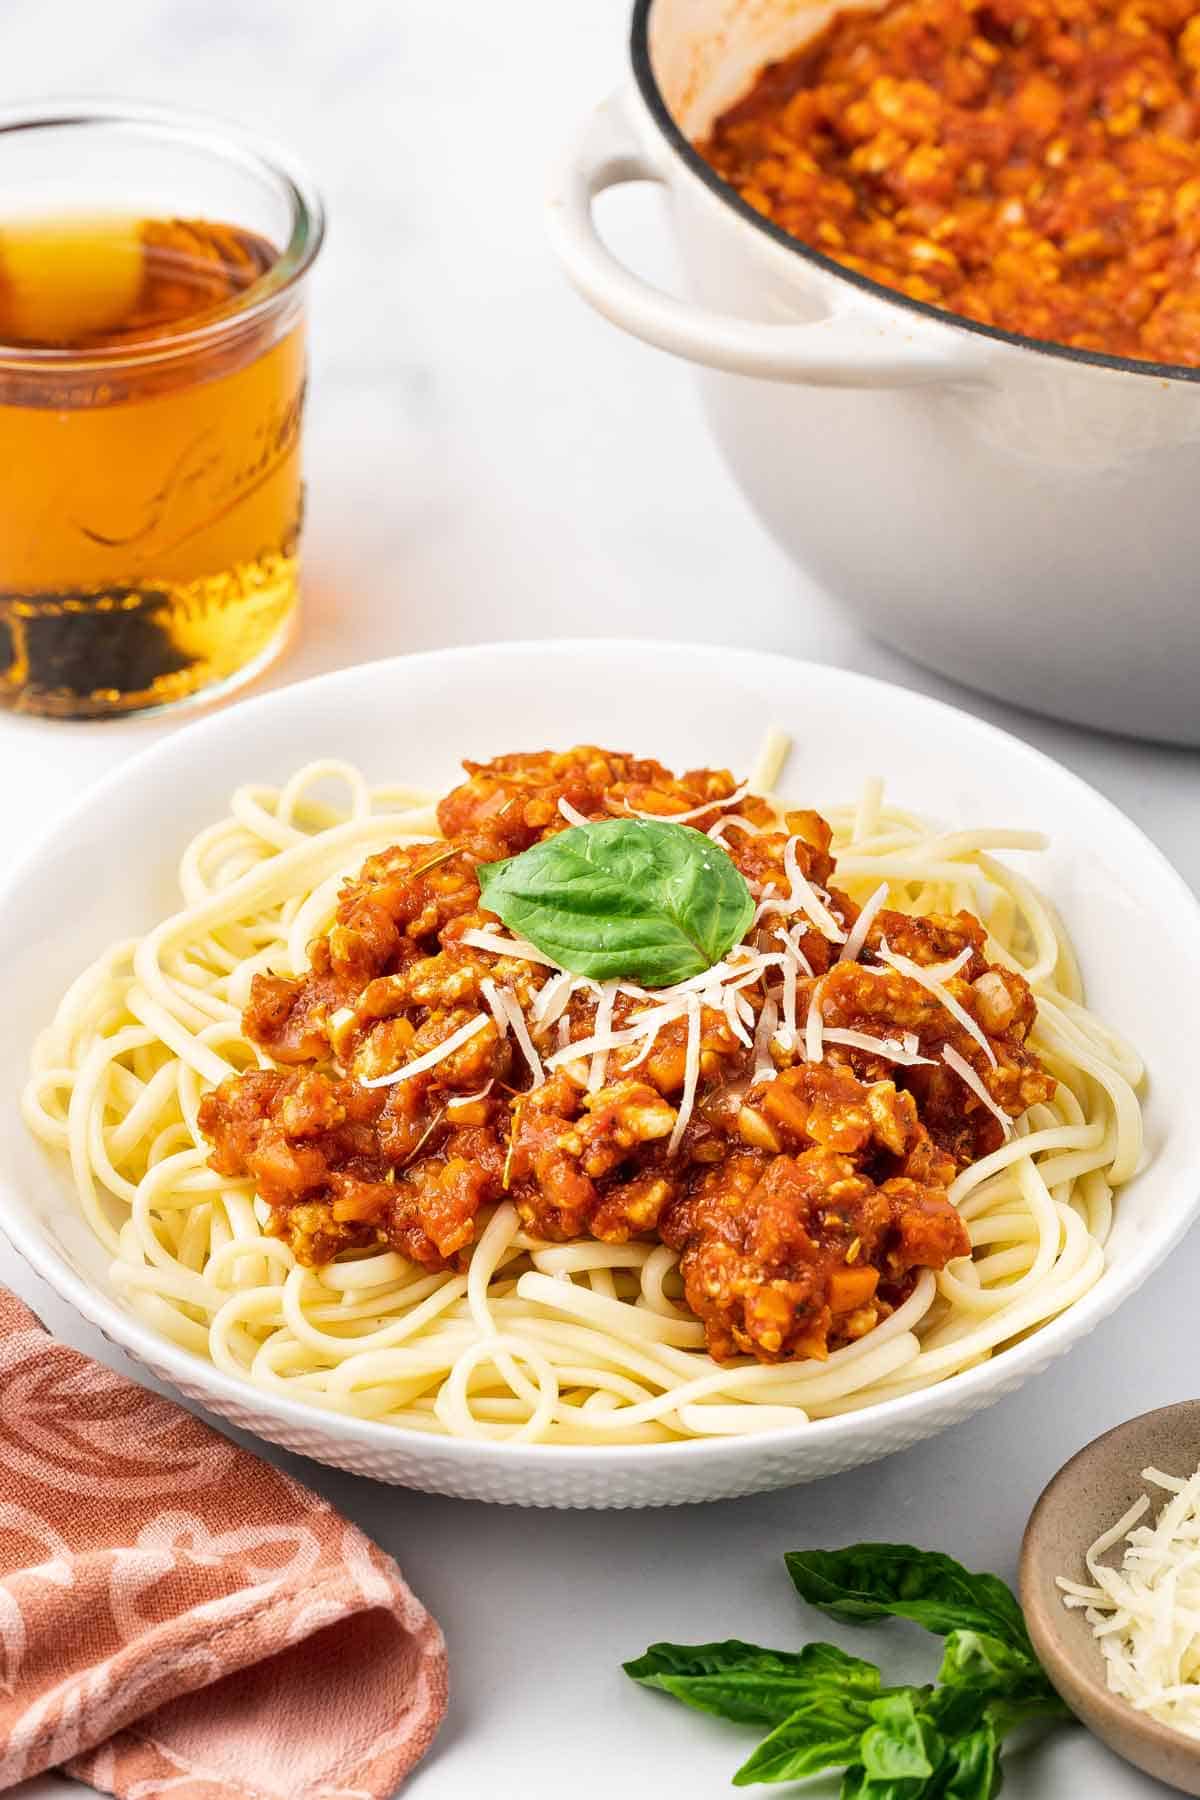 A plate of chicken bolognese with noodles.